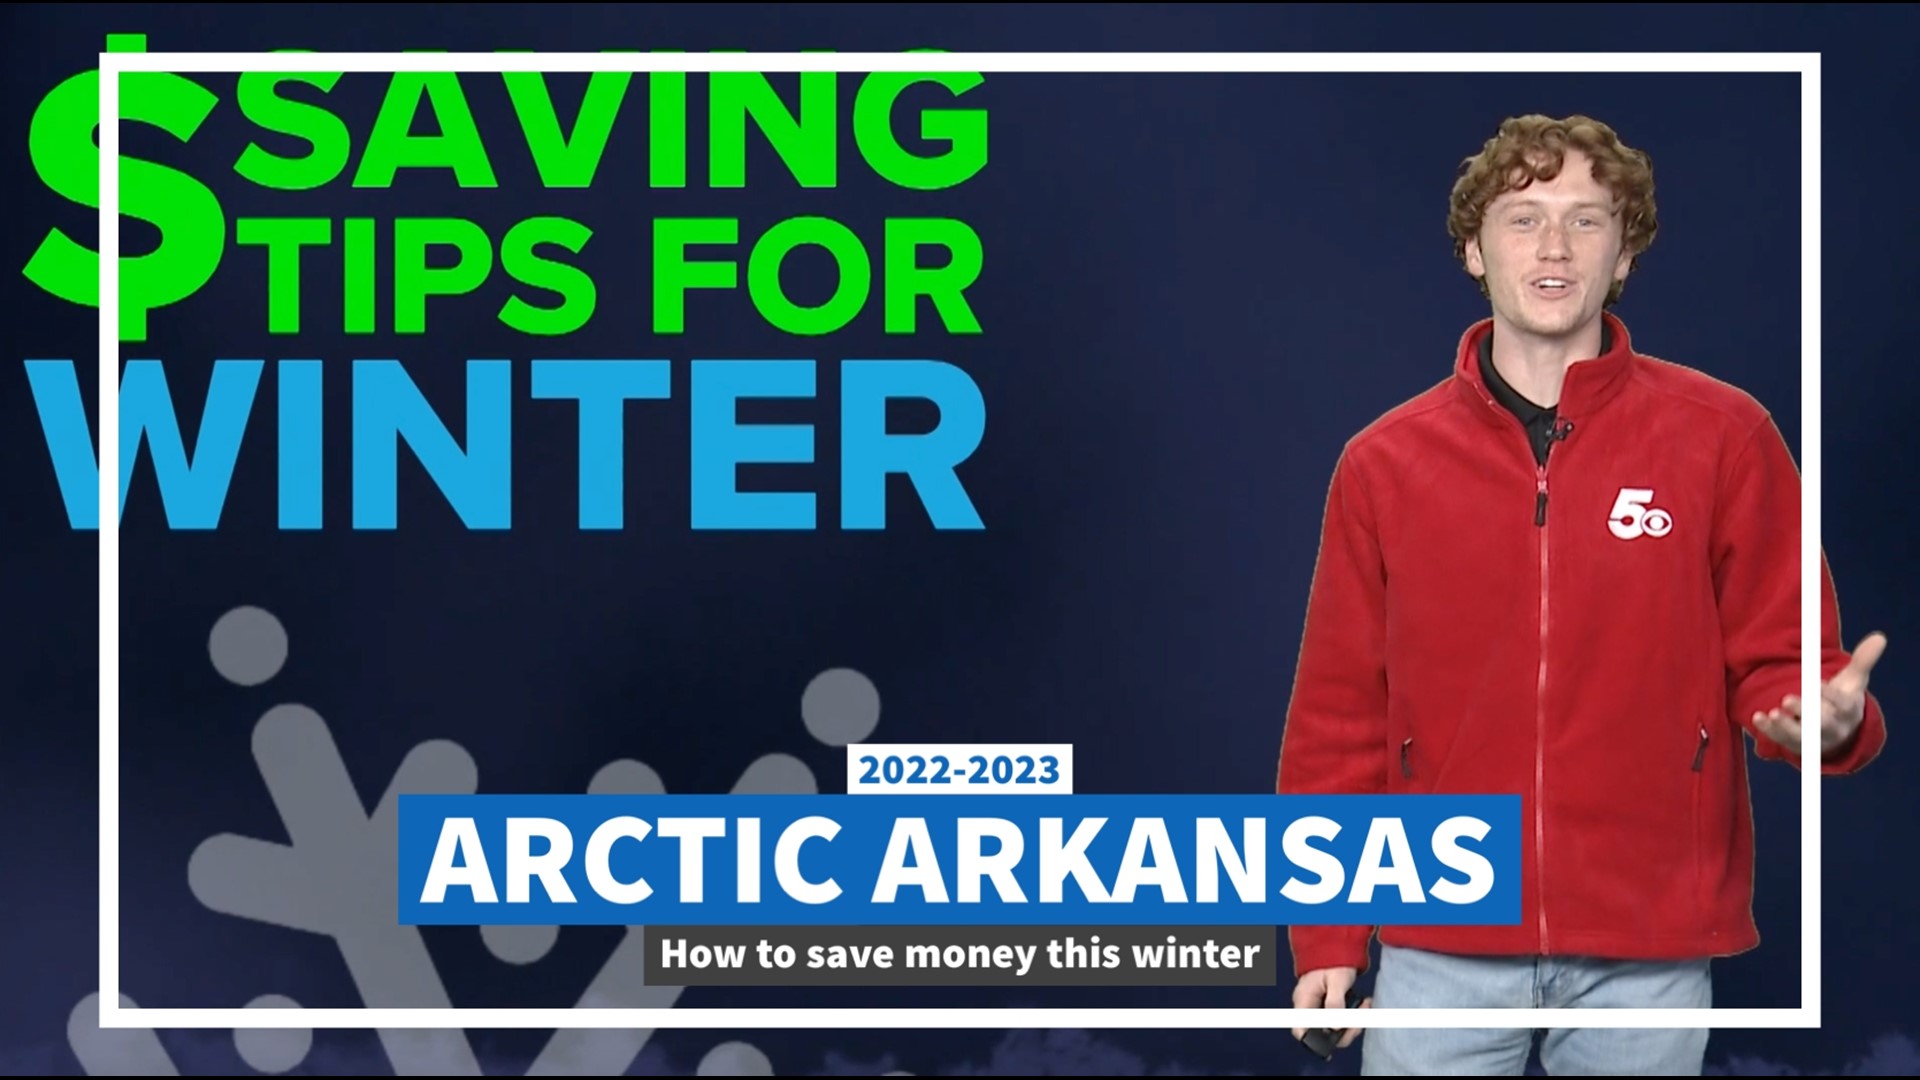 The cost of everything seems to keep going up, so how can you save money to keep your wallet warm this winter?